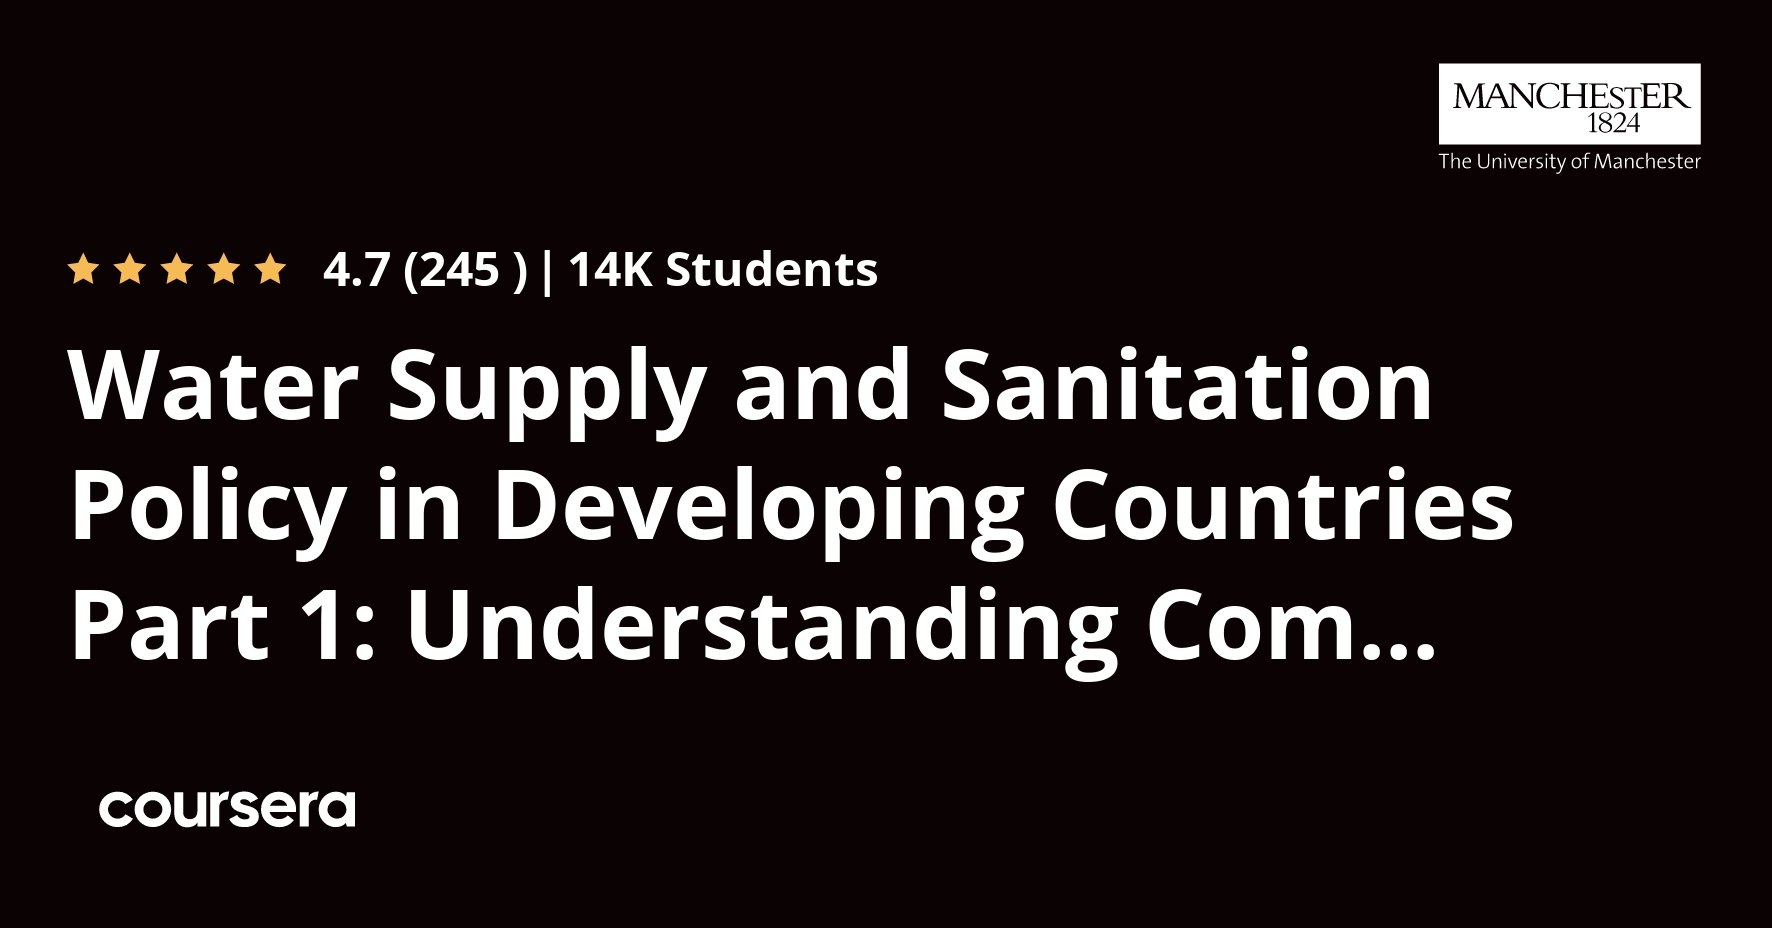 Water Supply and Sanitation Policy in Developing Countries